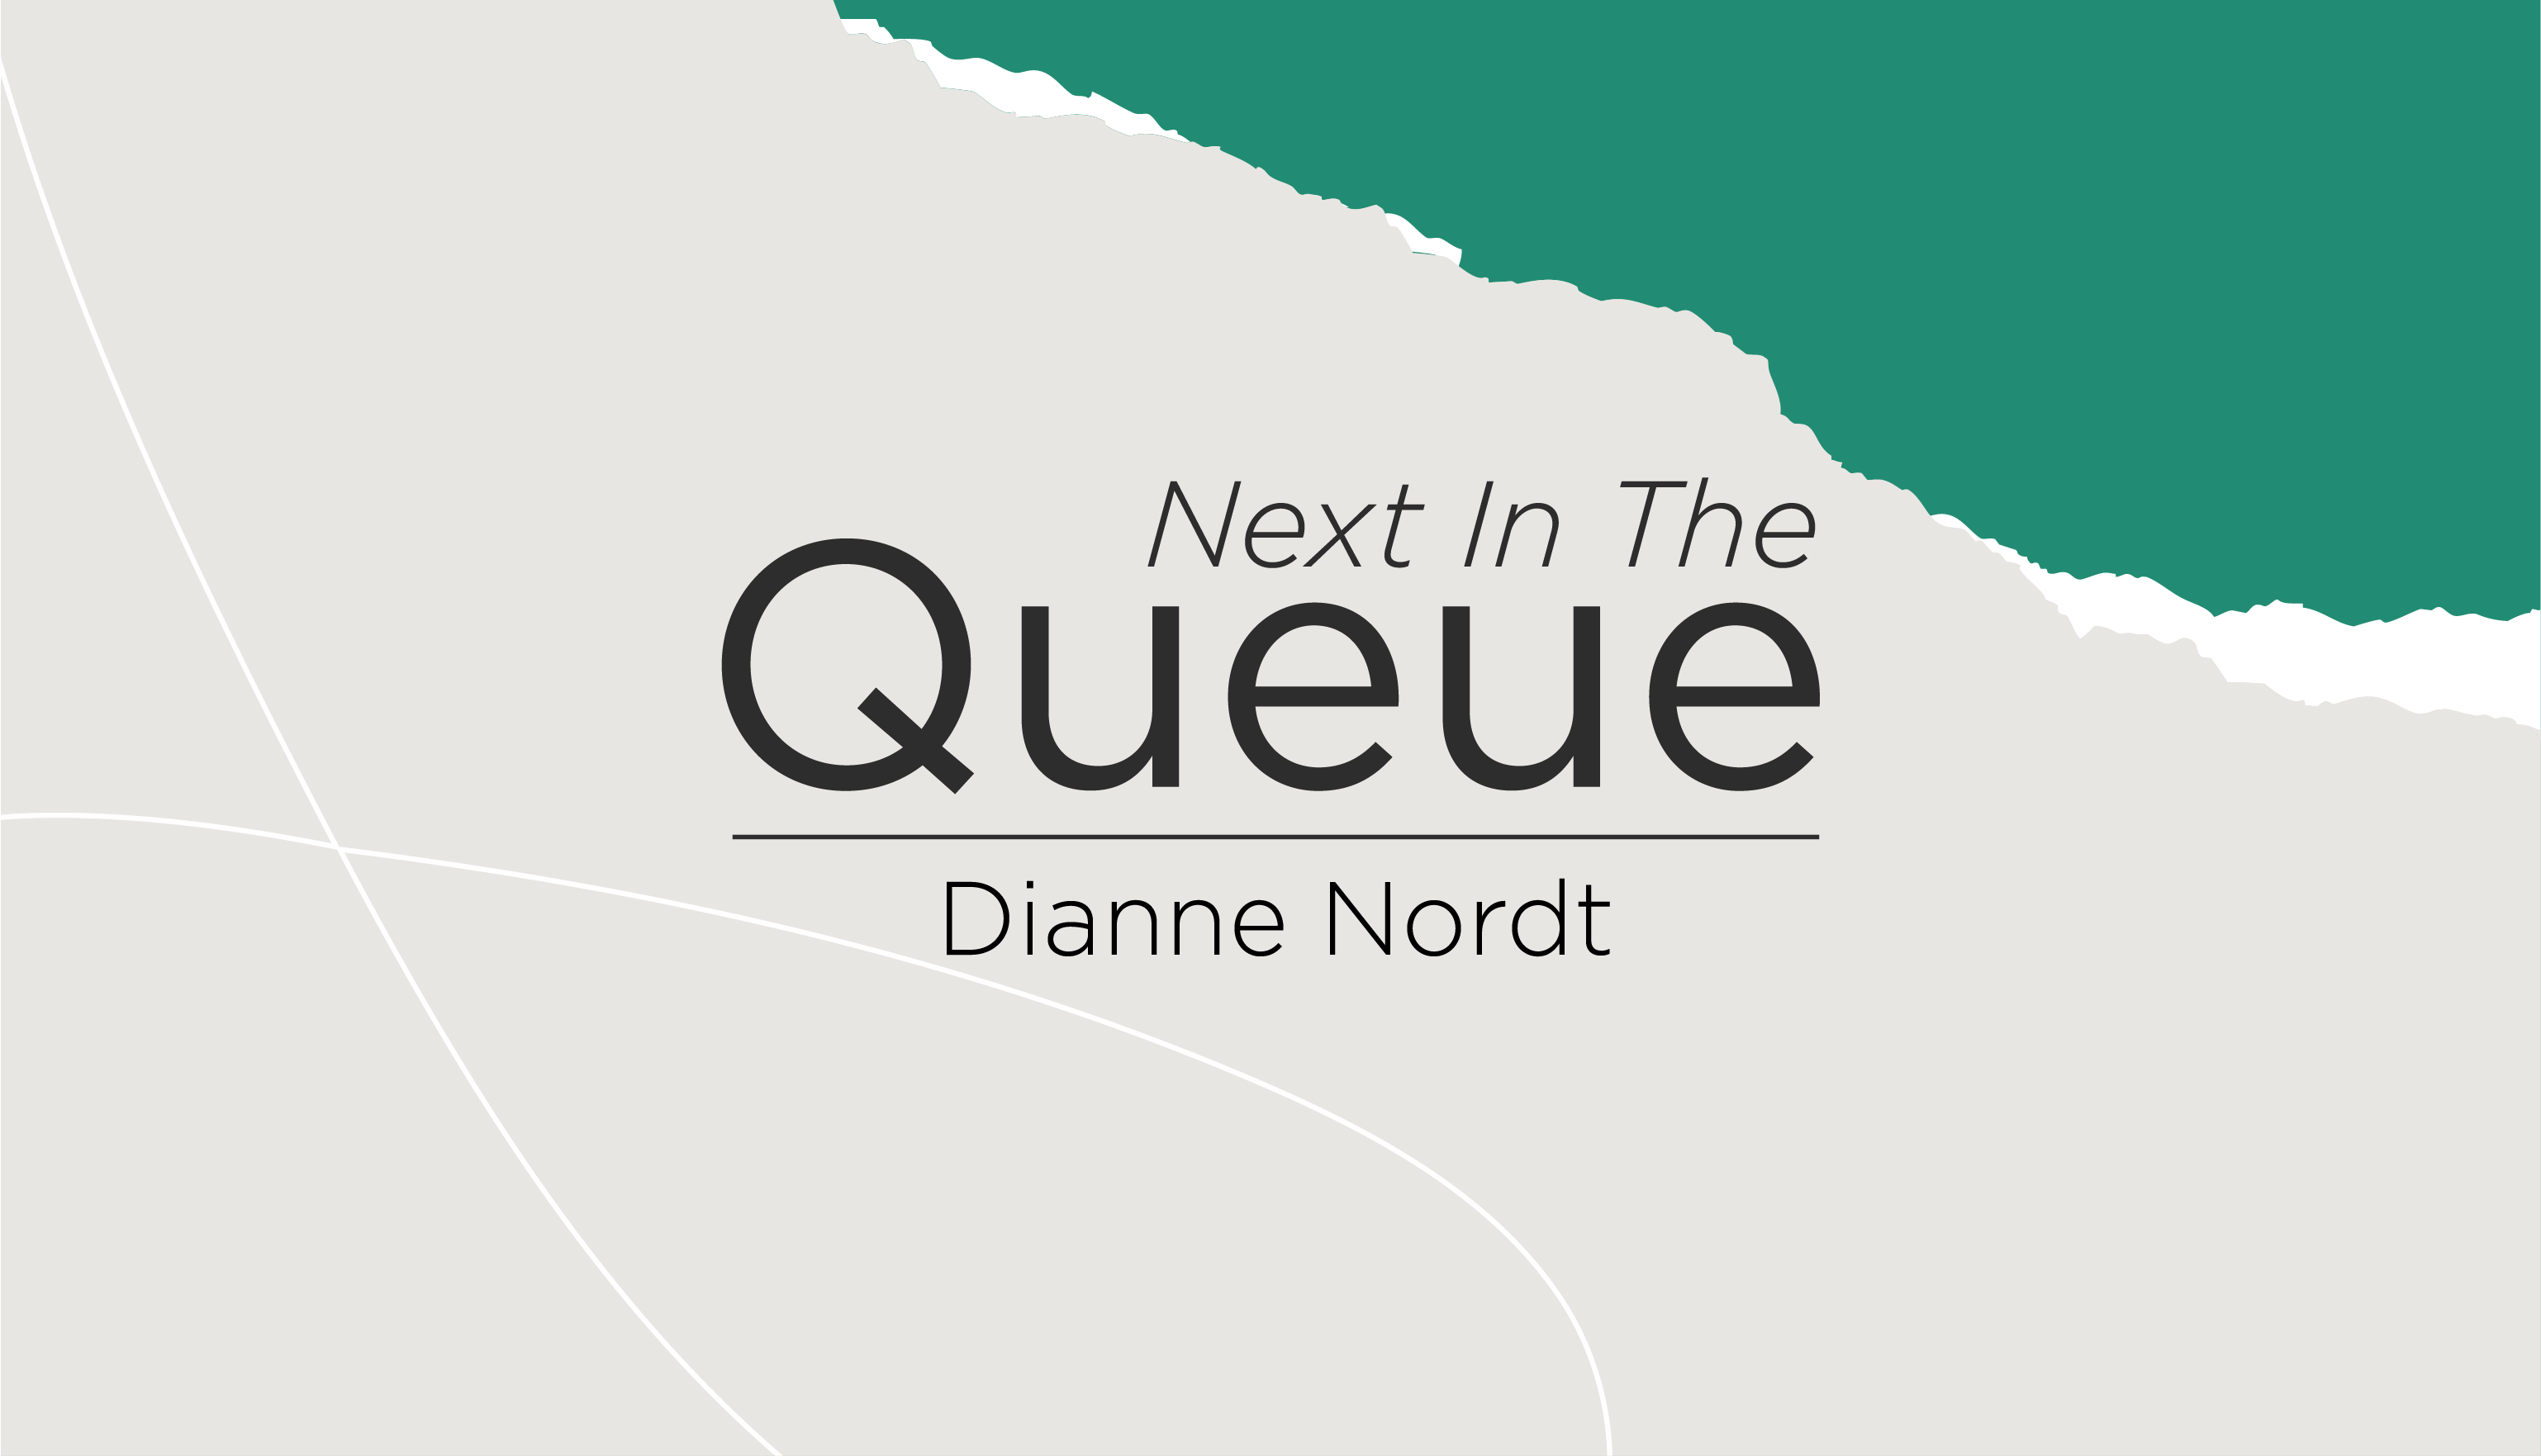 blog post cover graphic for The Queue featuring Diane Nordt